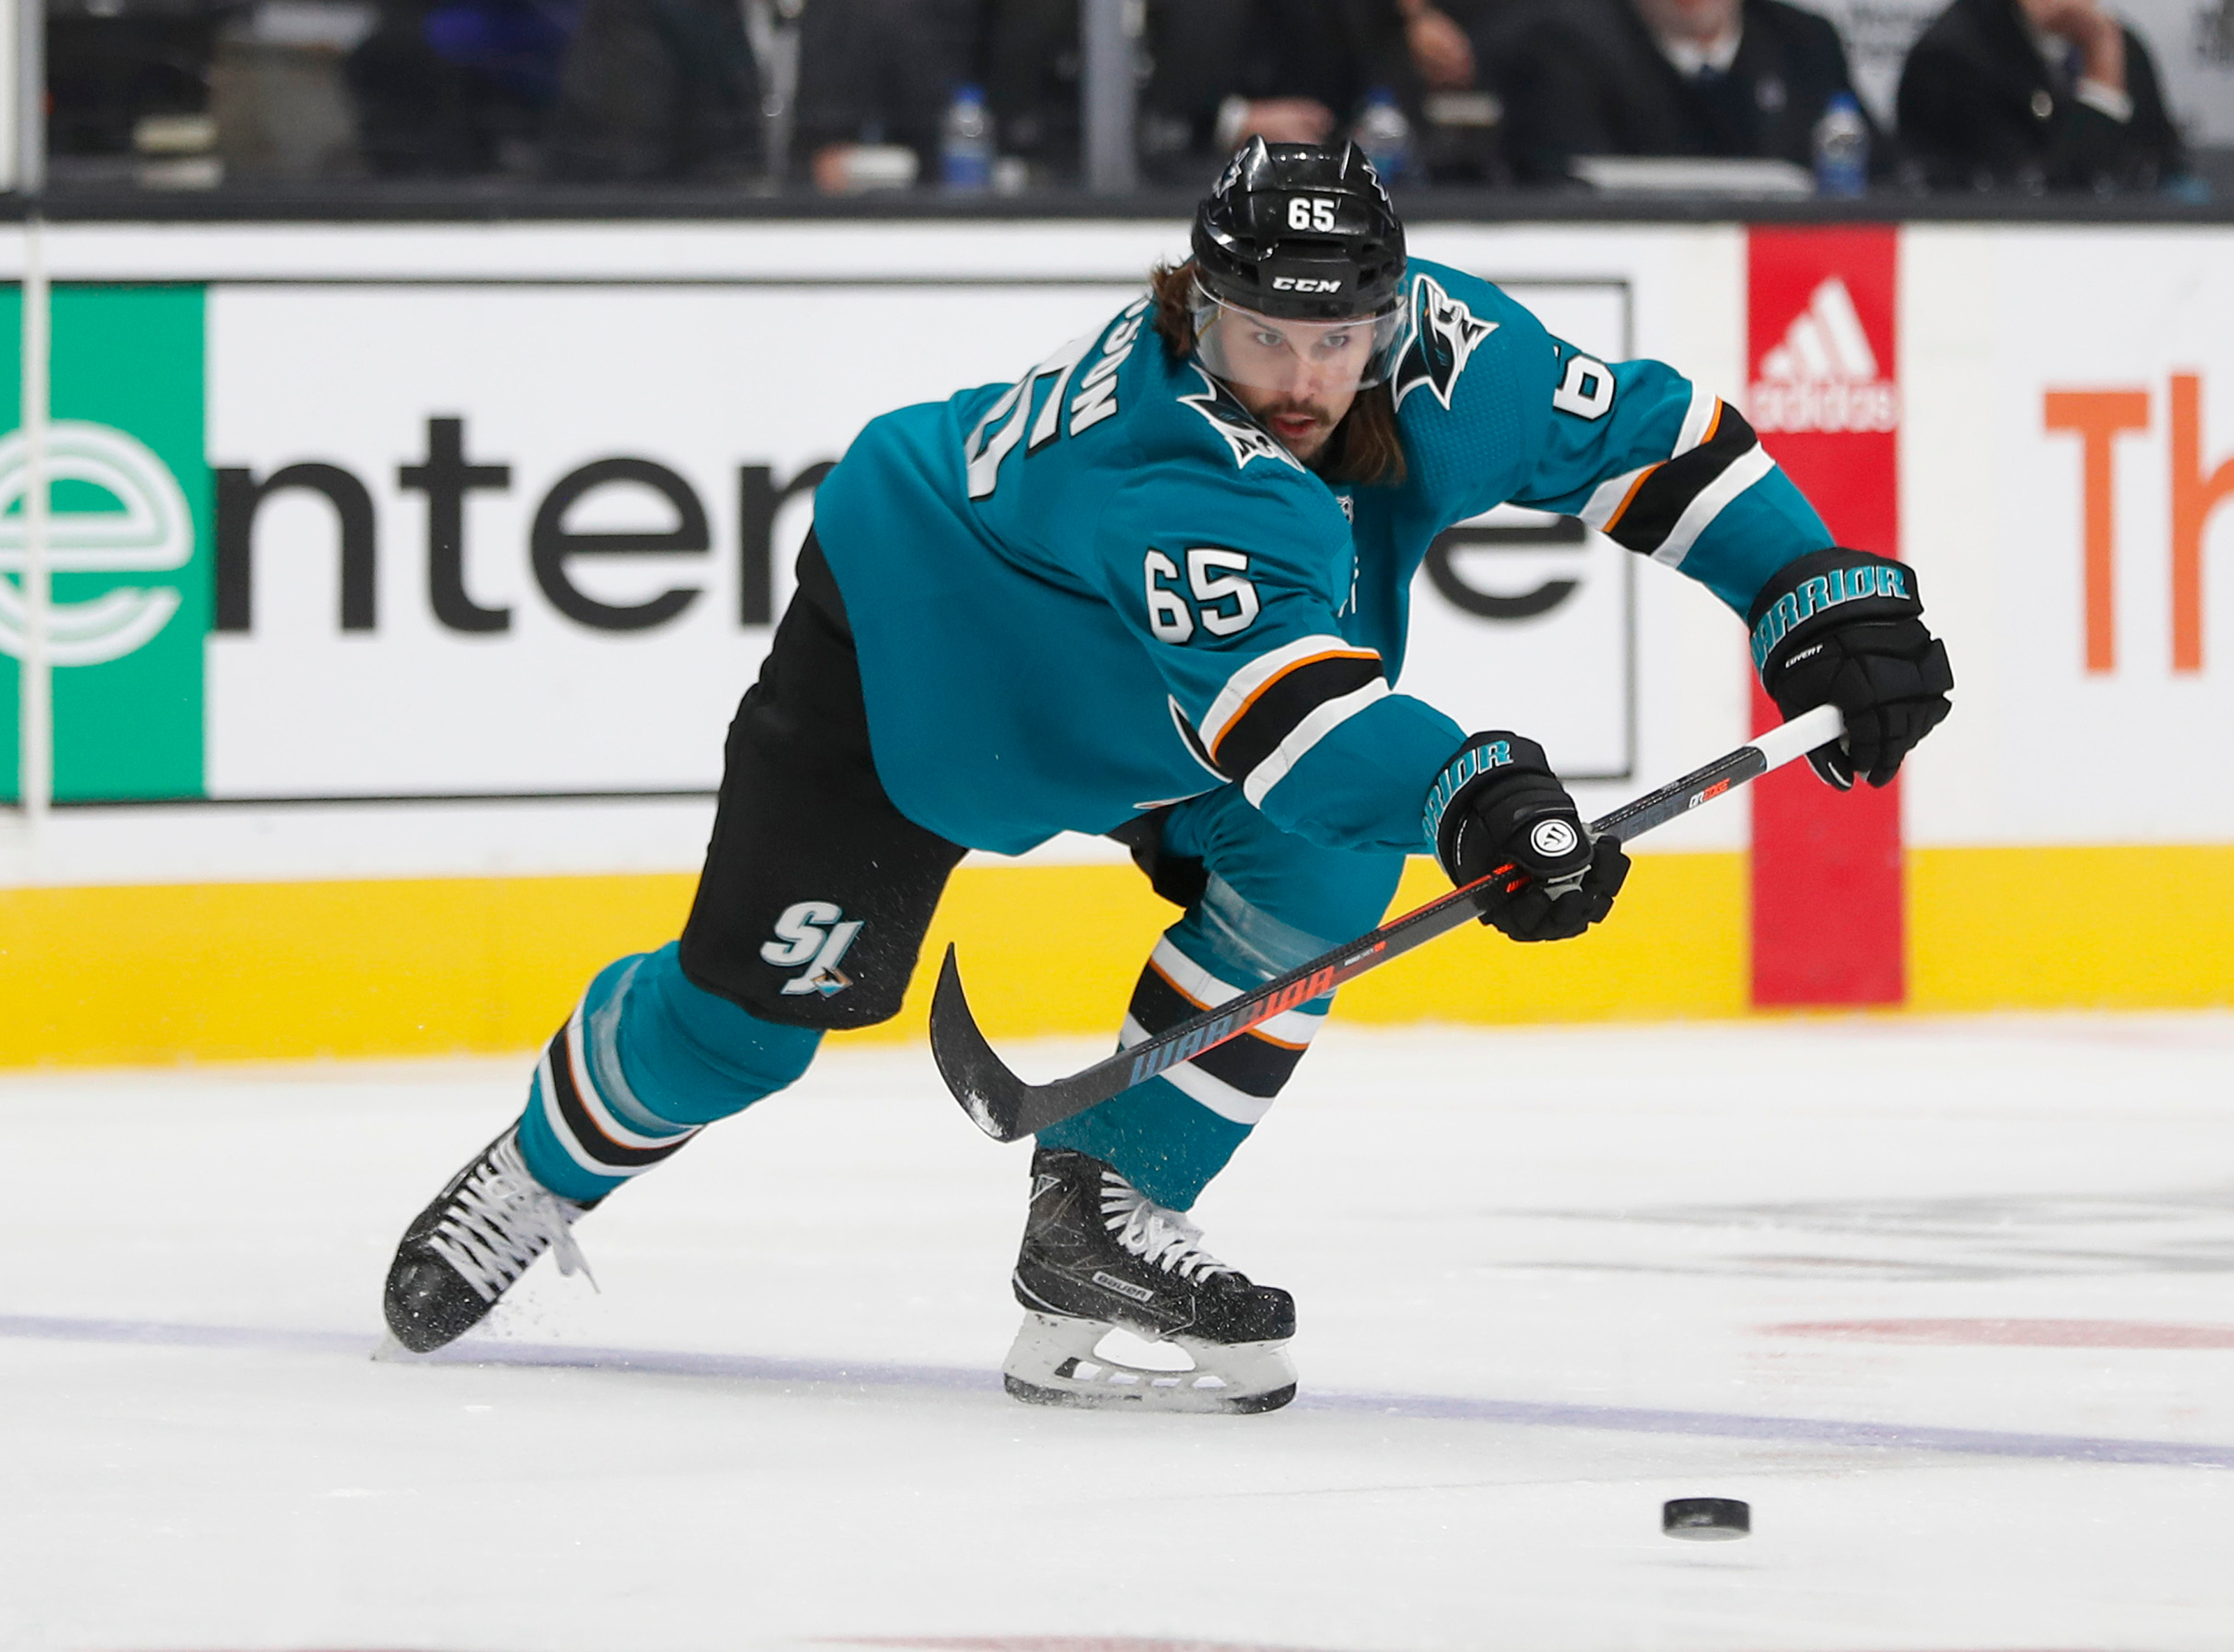 Erik Karlsson could miss significant time, but expects to be